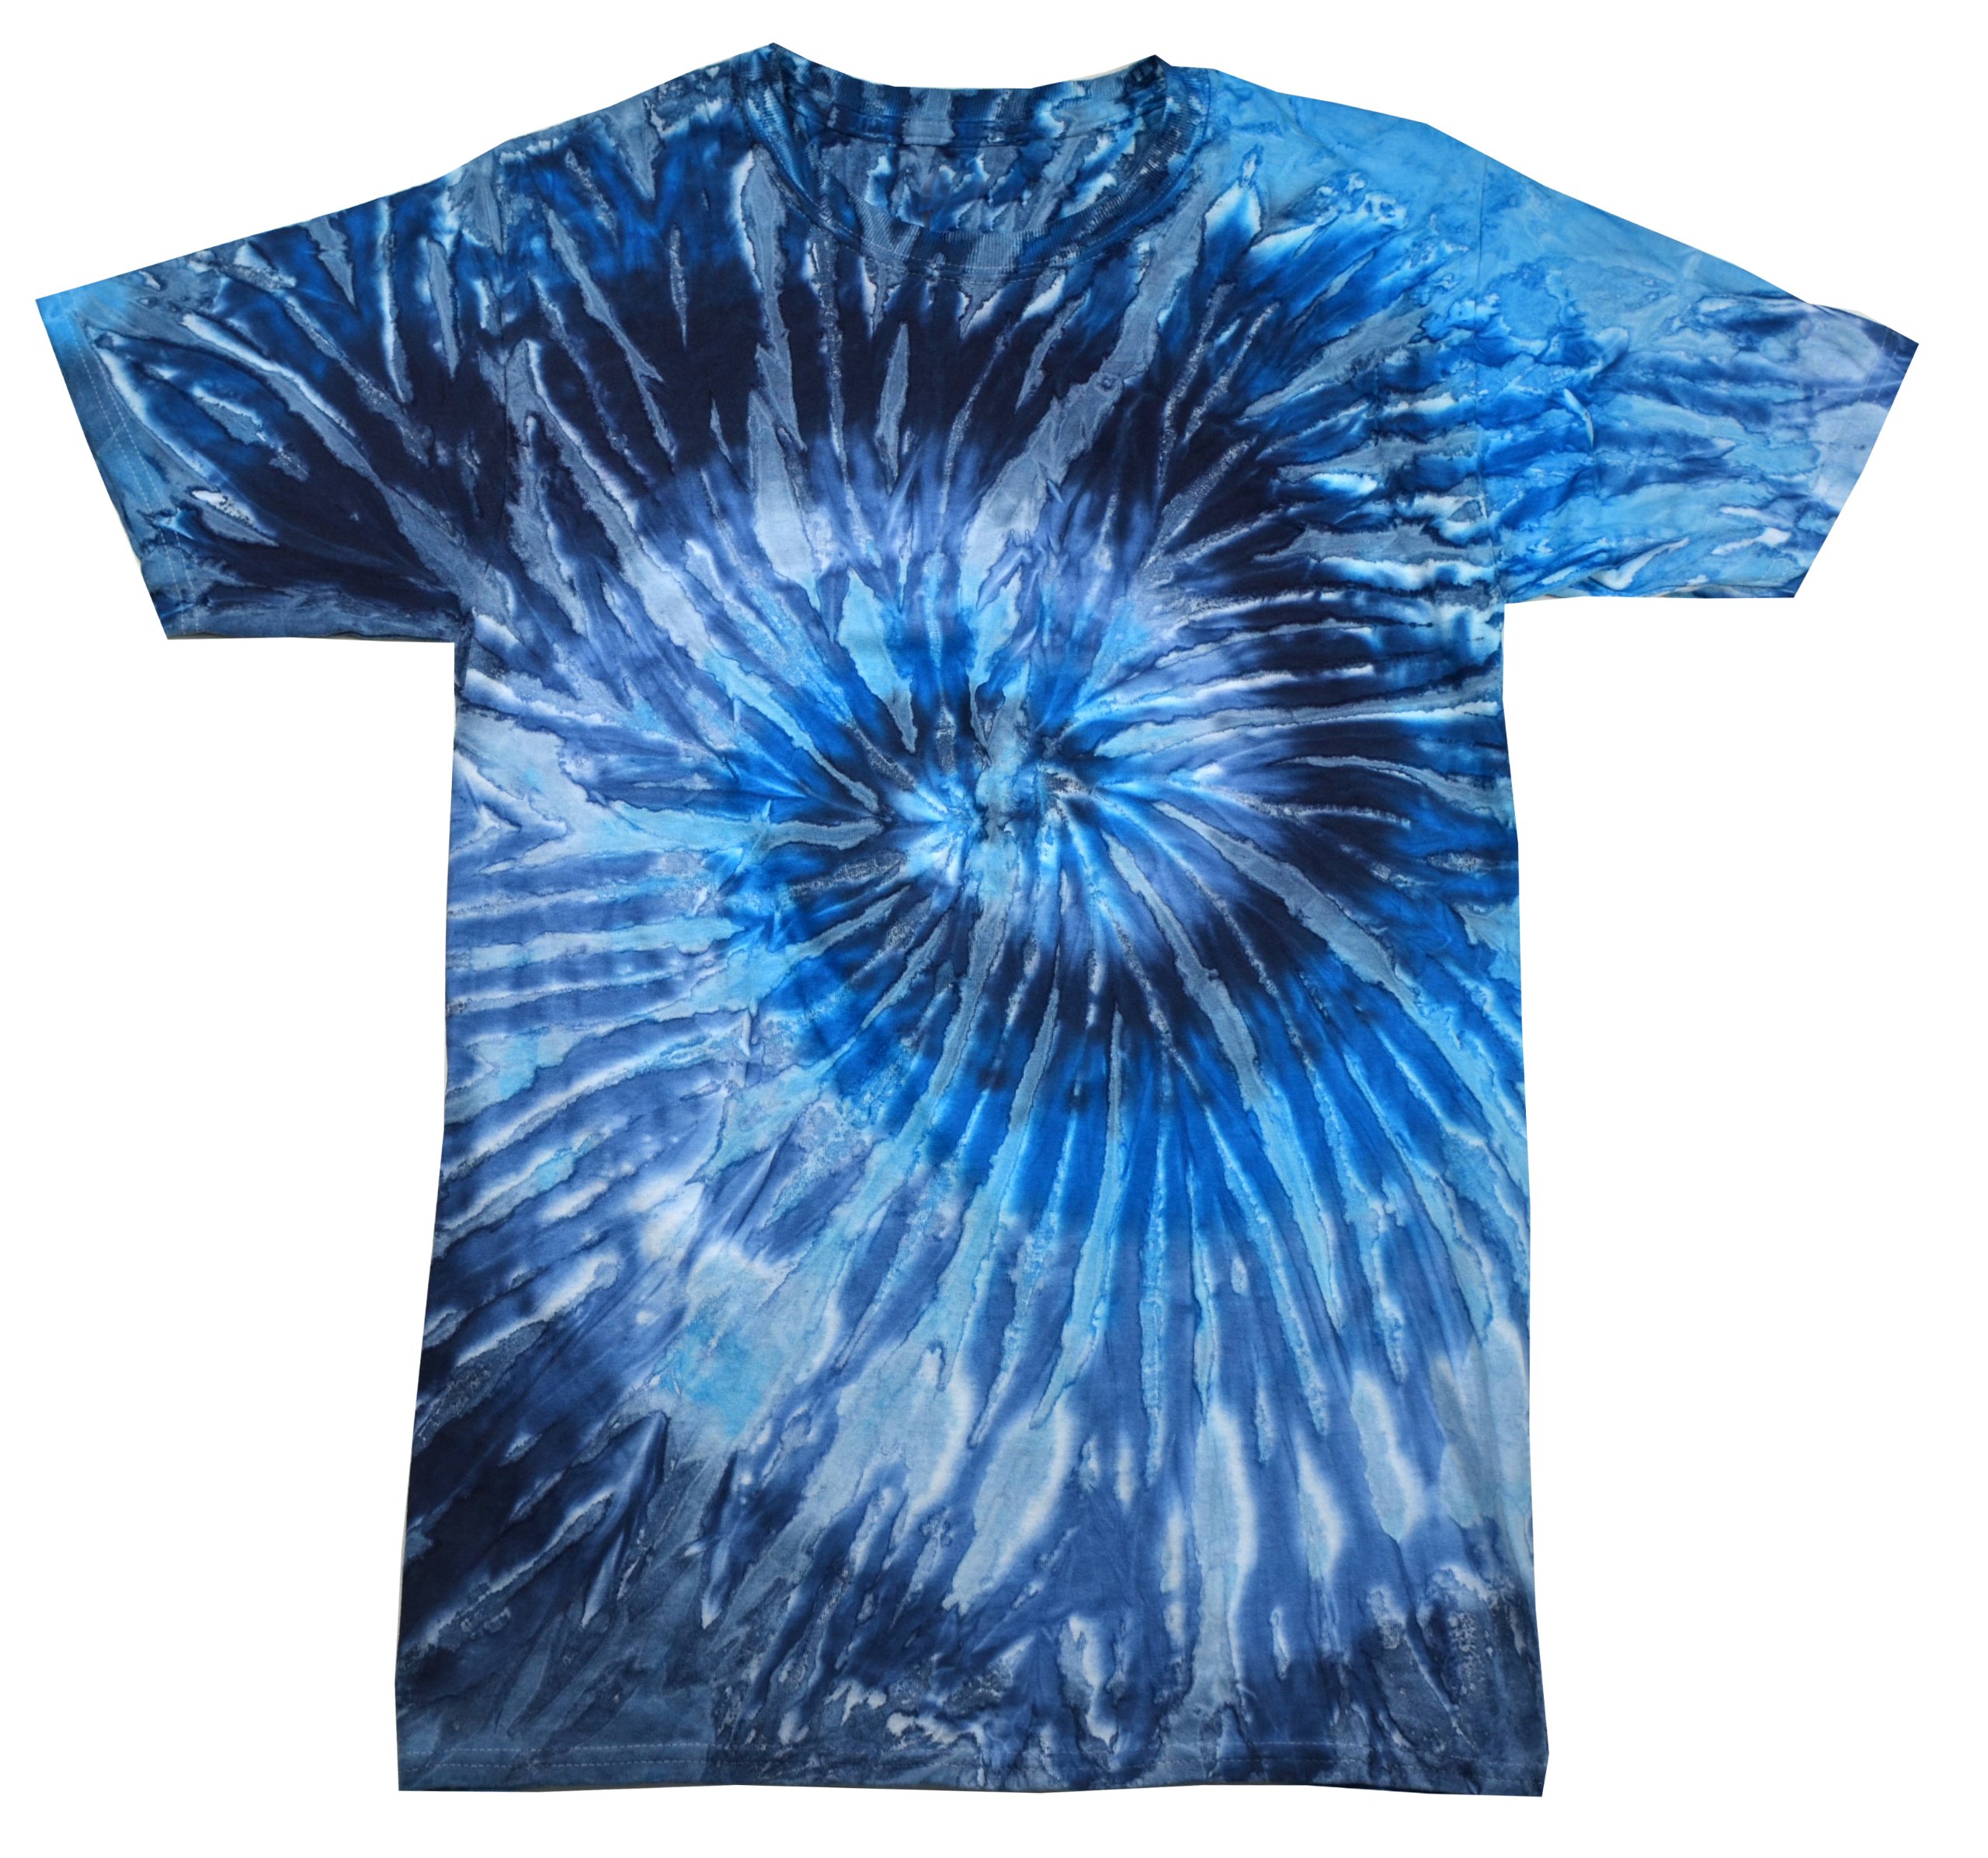 Colortone Youth & Adult Tie Dye T-Shirt